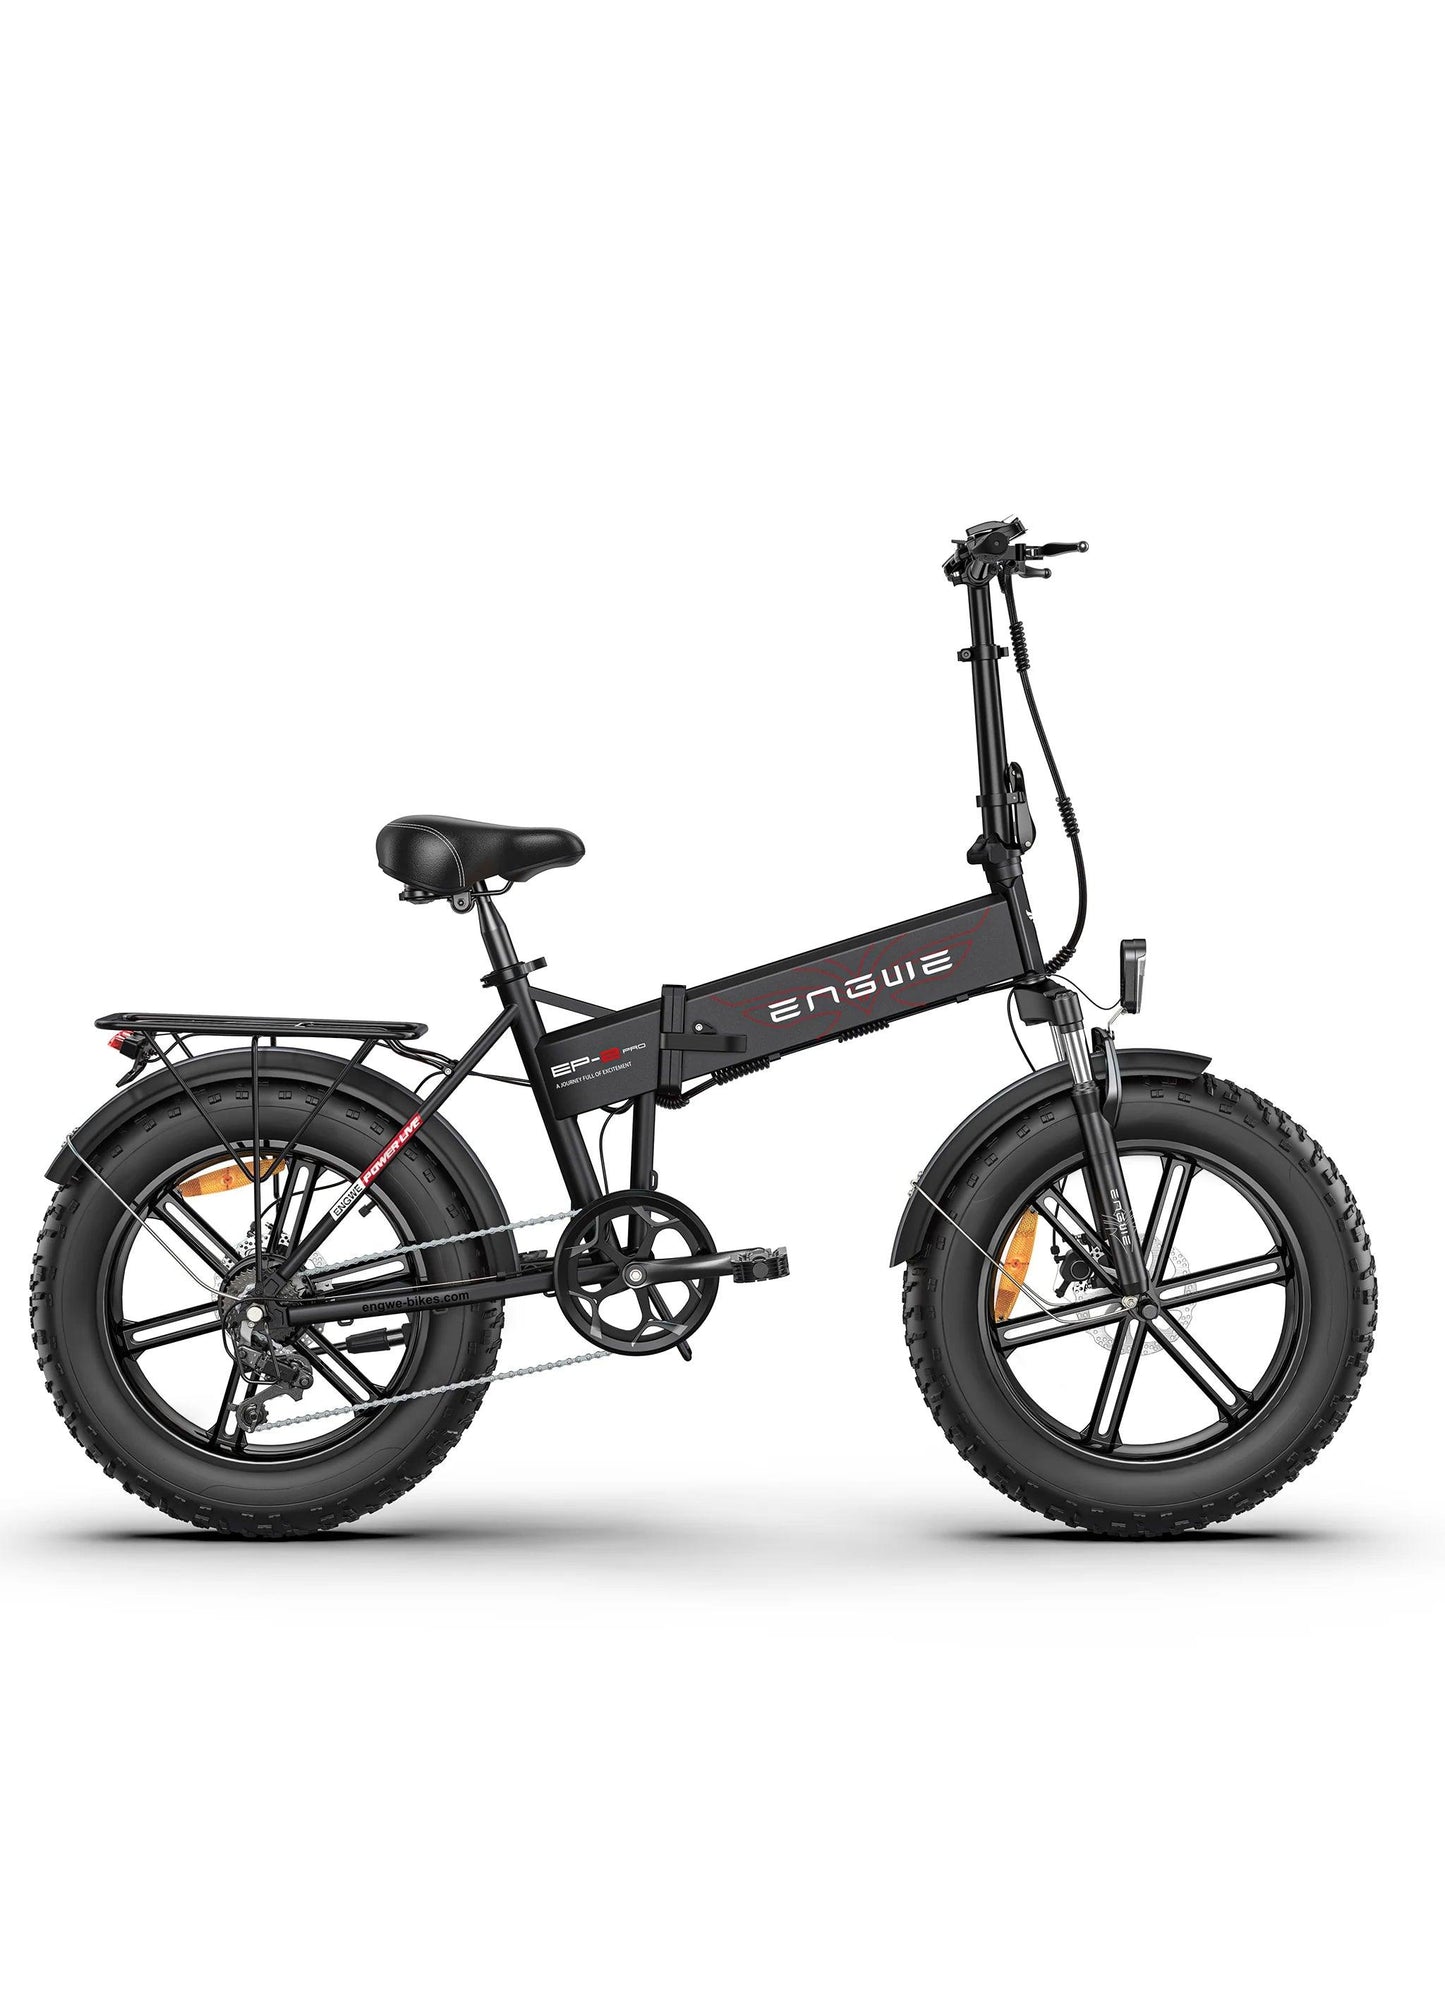 Engwe EP-2 / EP2 Pro (Upgraded Version) Electric Bike preorder - Pogo Cycles